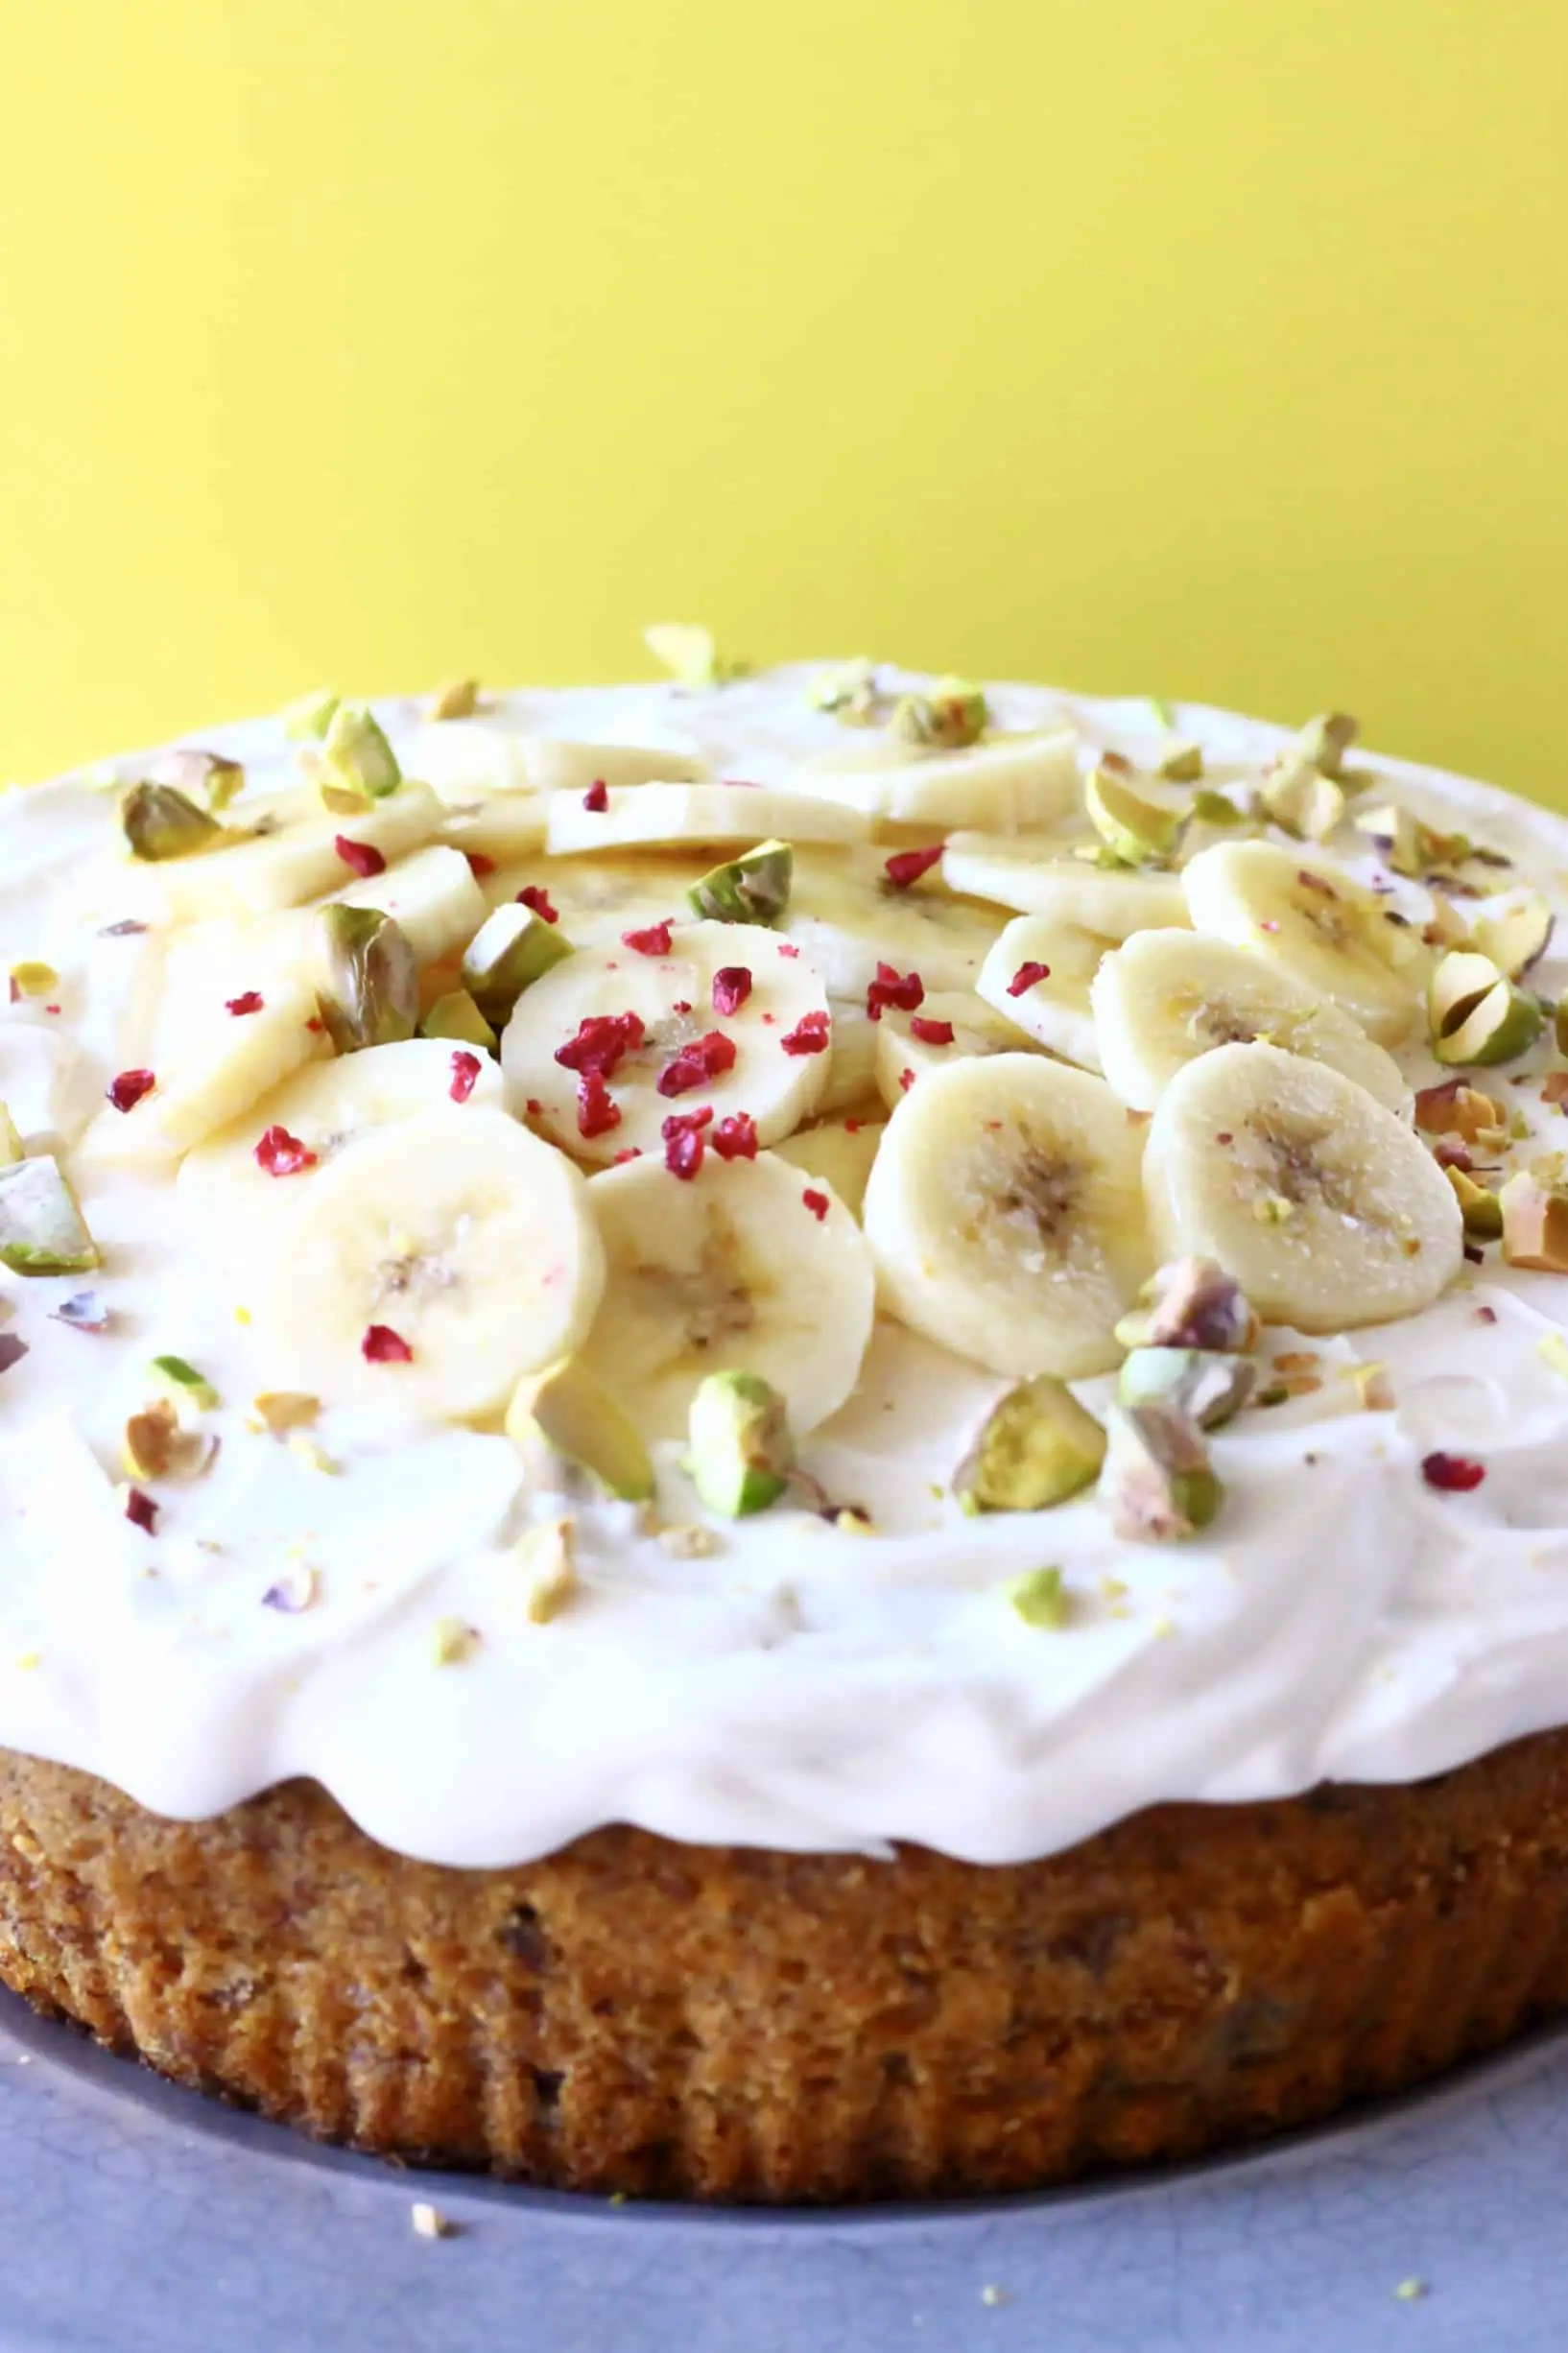 A gluten-free vegan banana cake topped with vegan cream cheese  frosting and sliced bananas